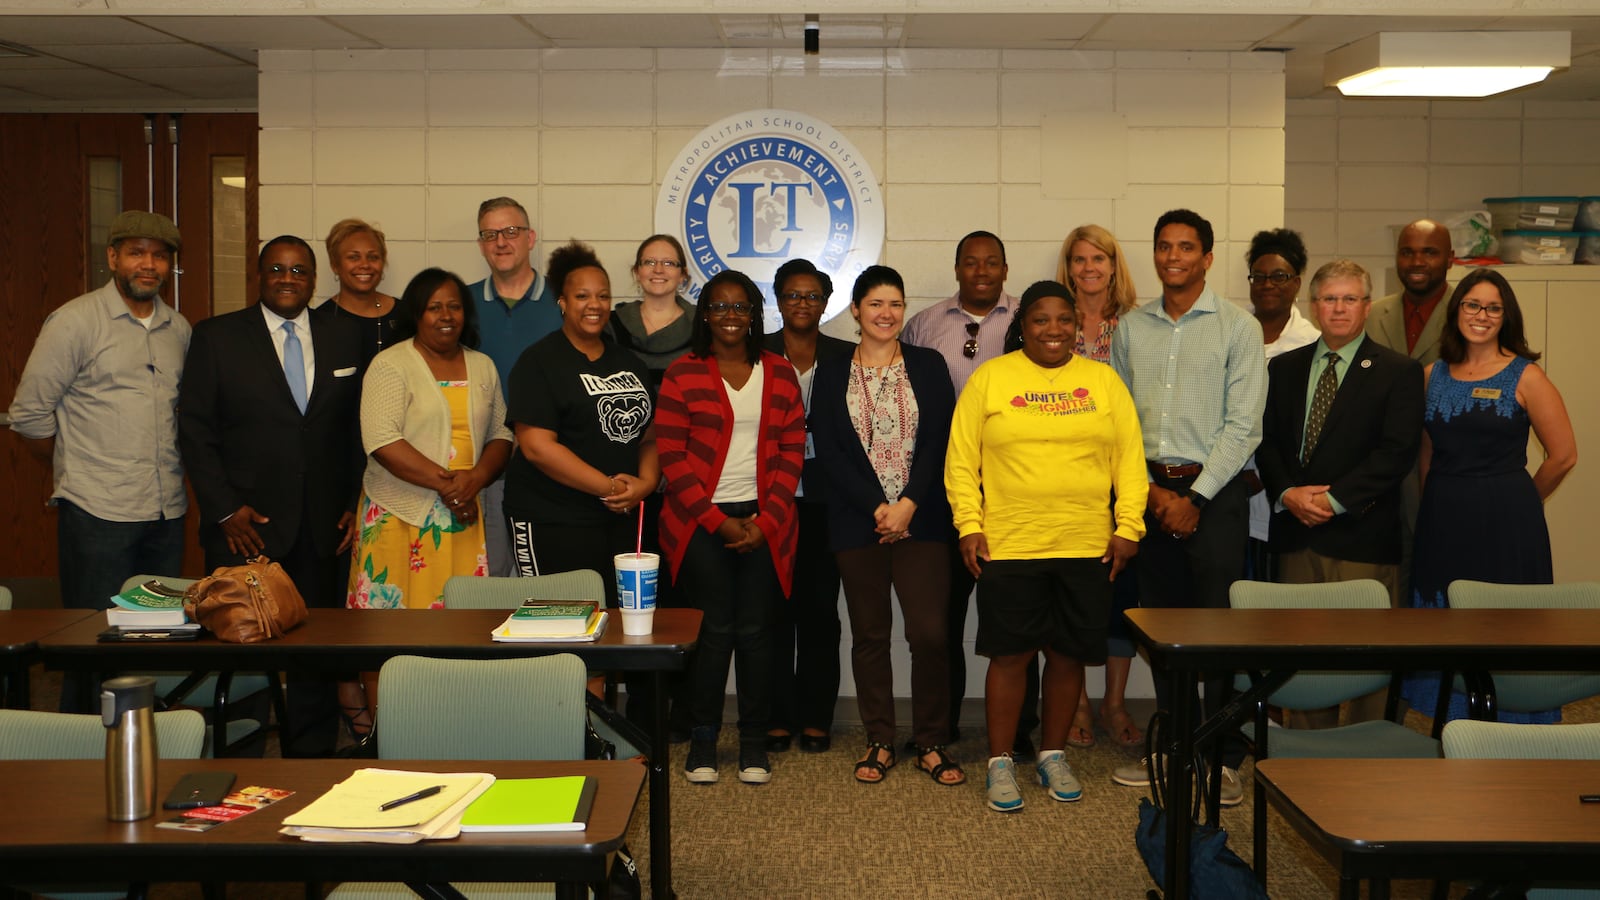 This year's Lawrence Township alternative license program cohort.